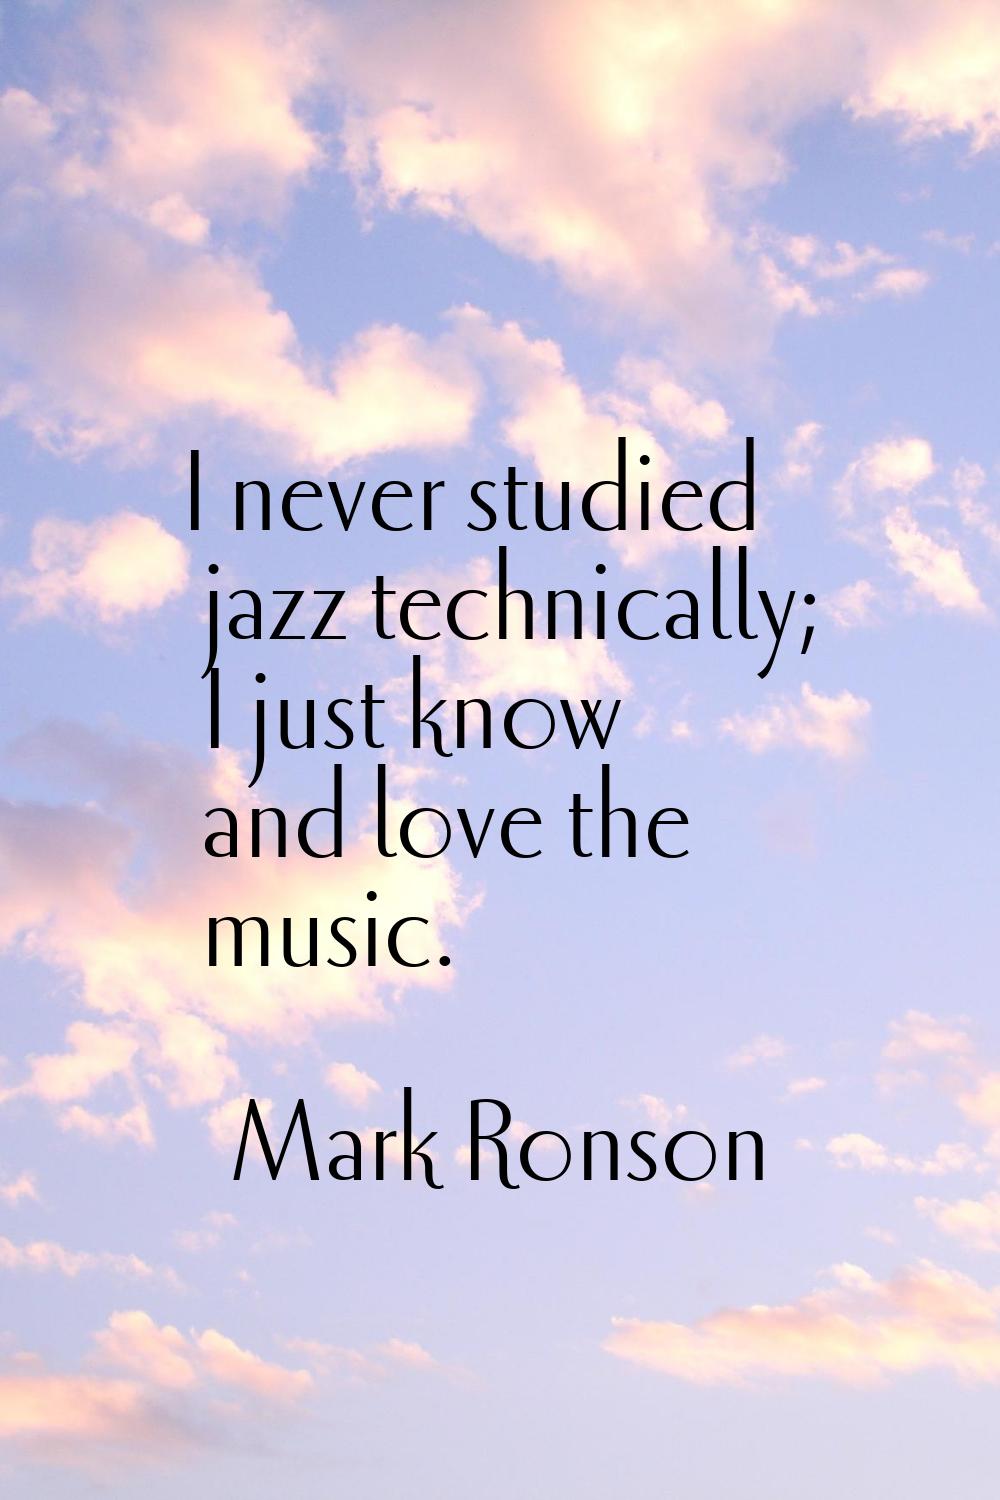 I never studied jazz technically; I just know and love the music.